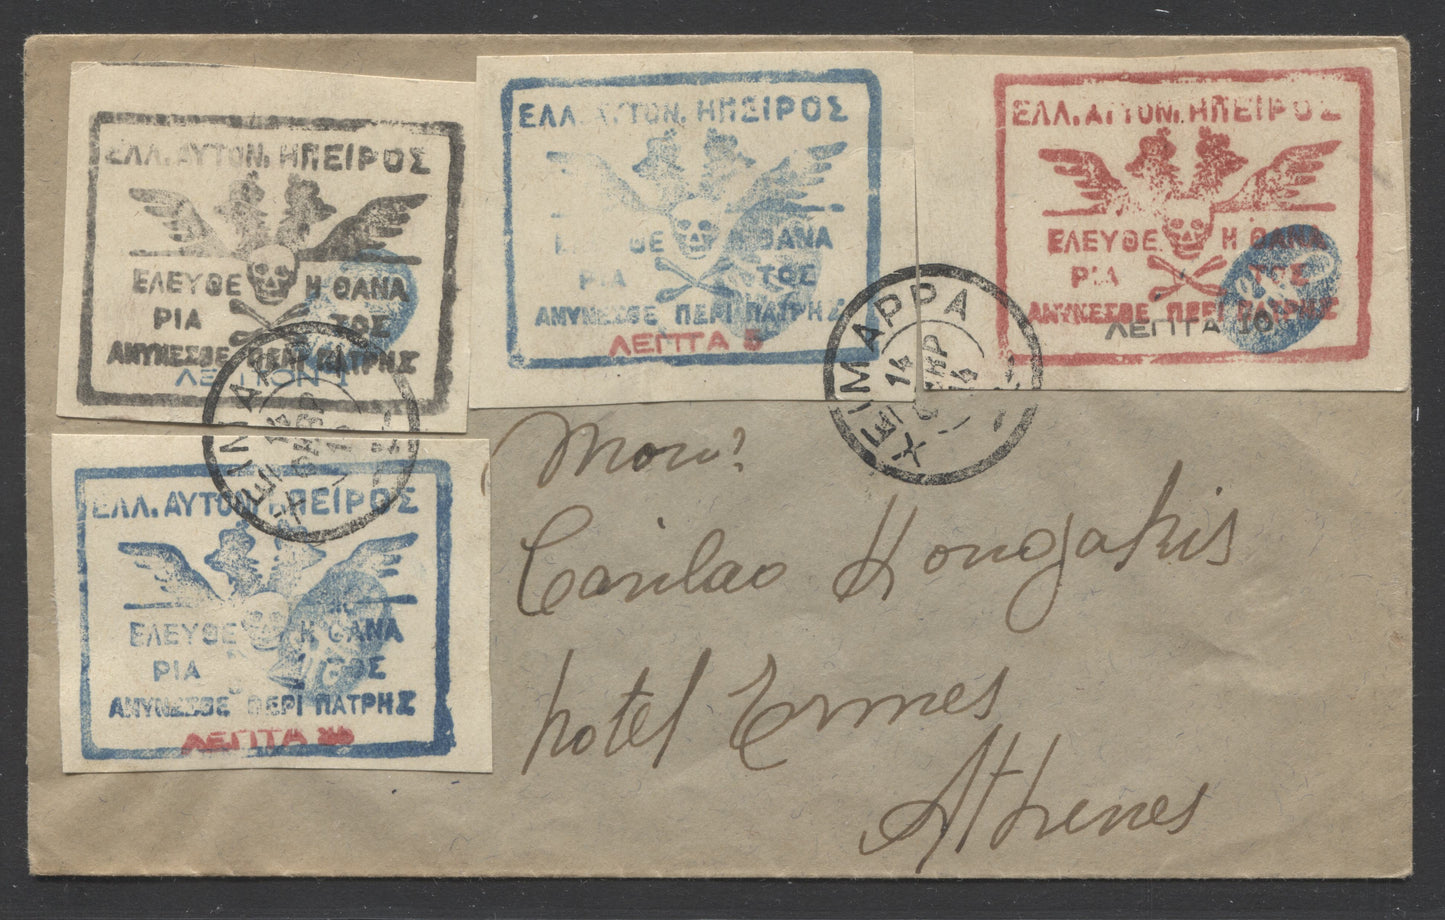 Lot 317 Greece - Epirus SC#1-4 Forgery Cover of 1914 Chimarra Issue, Scott Cat $1,750 for a Genuine Cover, Net. Est. $30